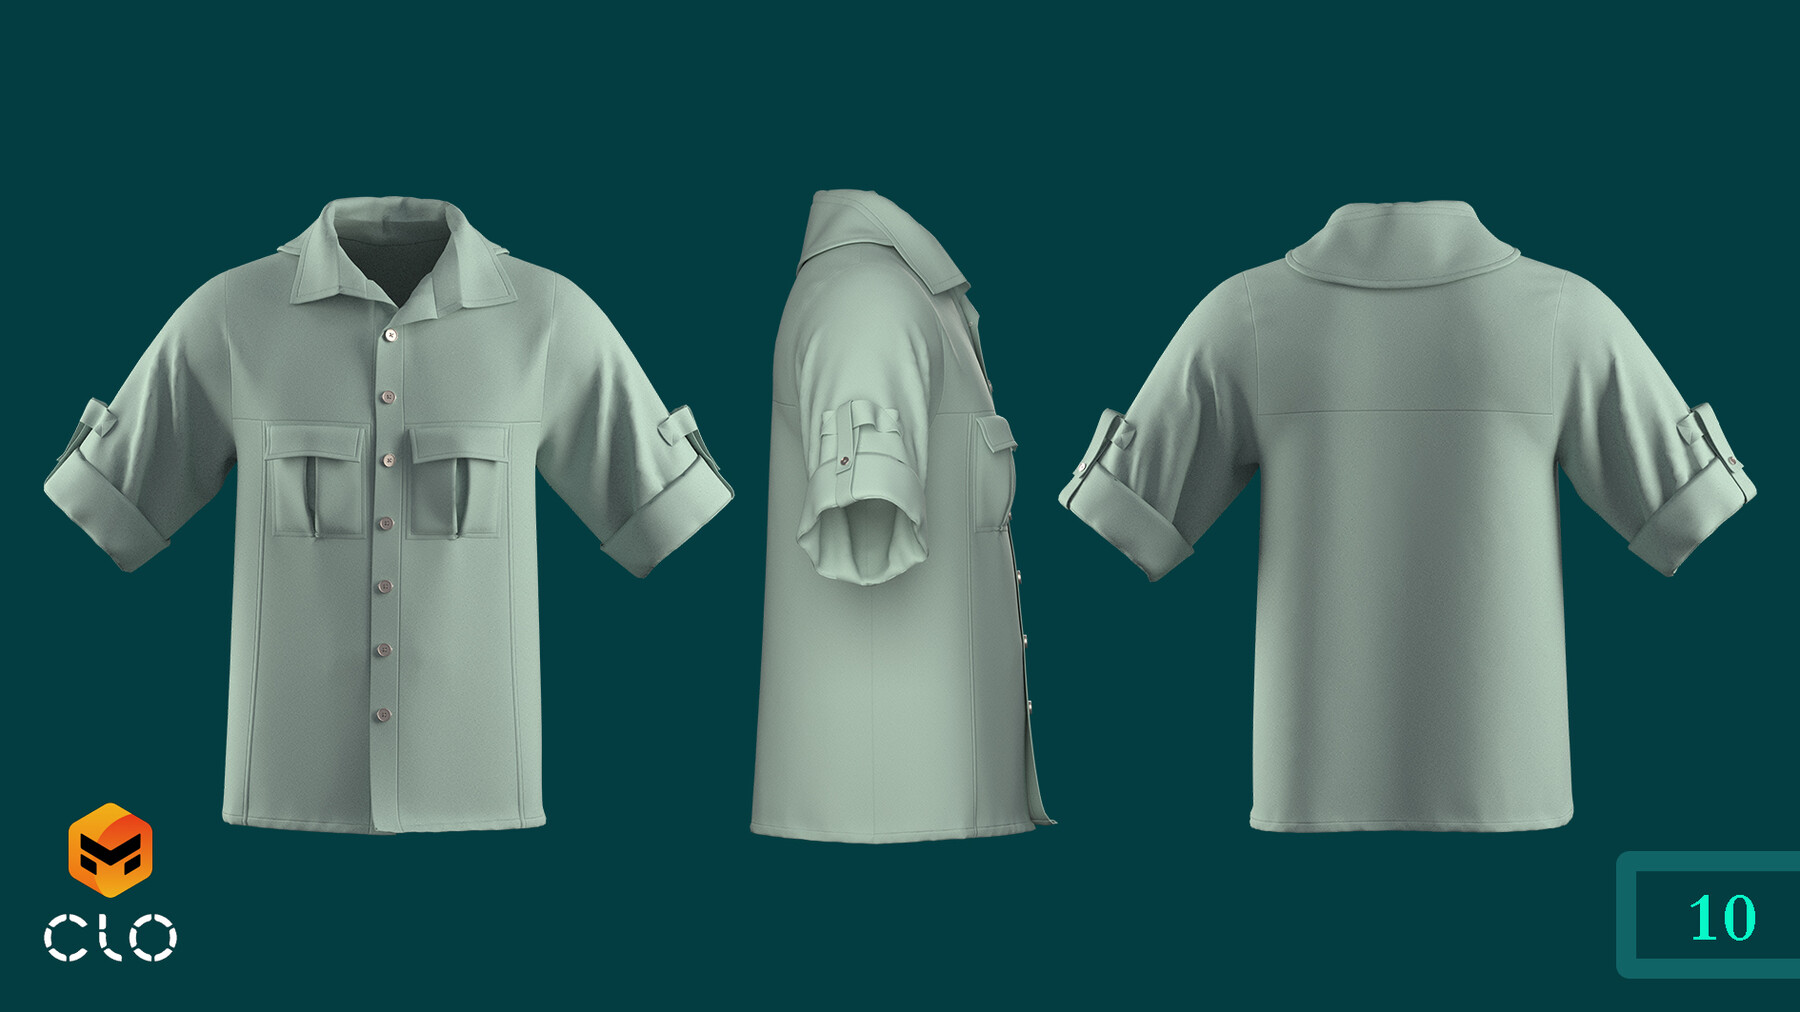 camping outfit pack (female/male outfit). CLO , MD projects+FBX+OBJ